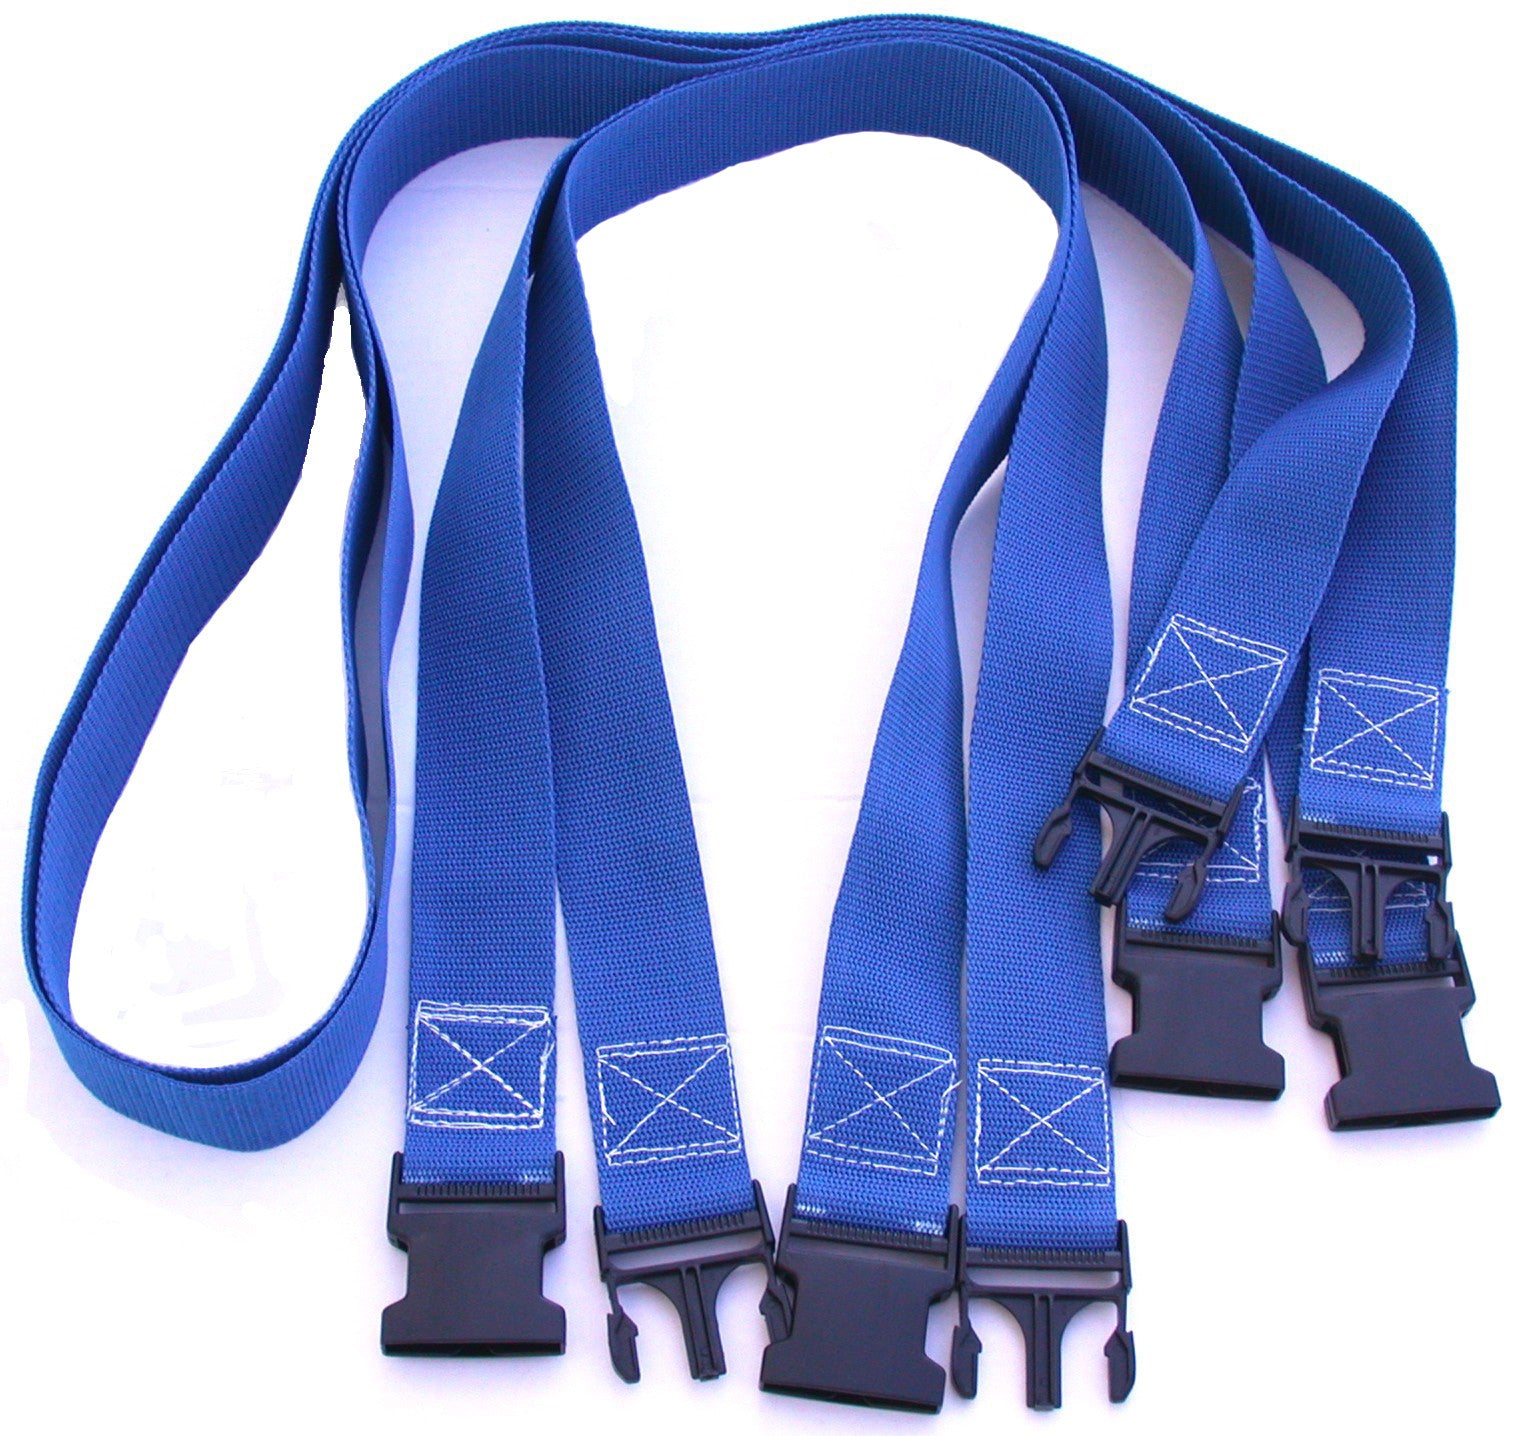 M8EXTBU-Blue webbing boundary extension lengths 26.3 to 30-ft court size